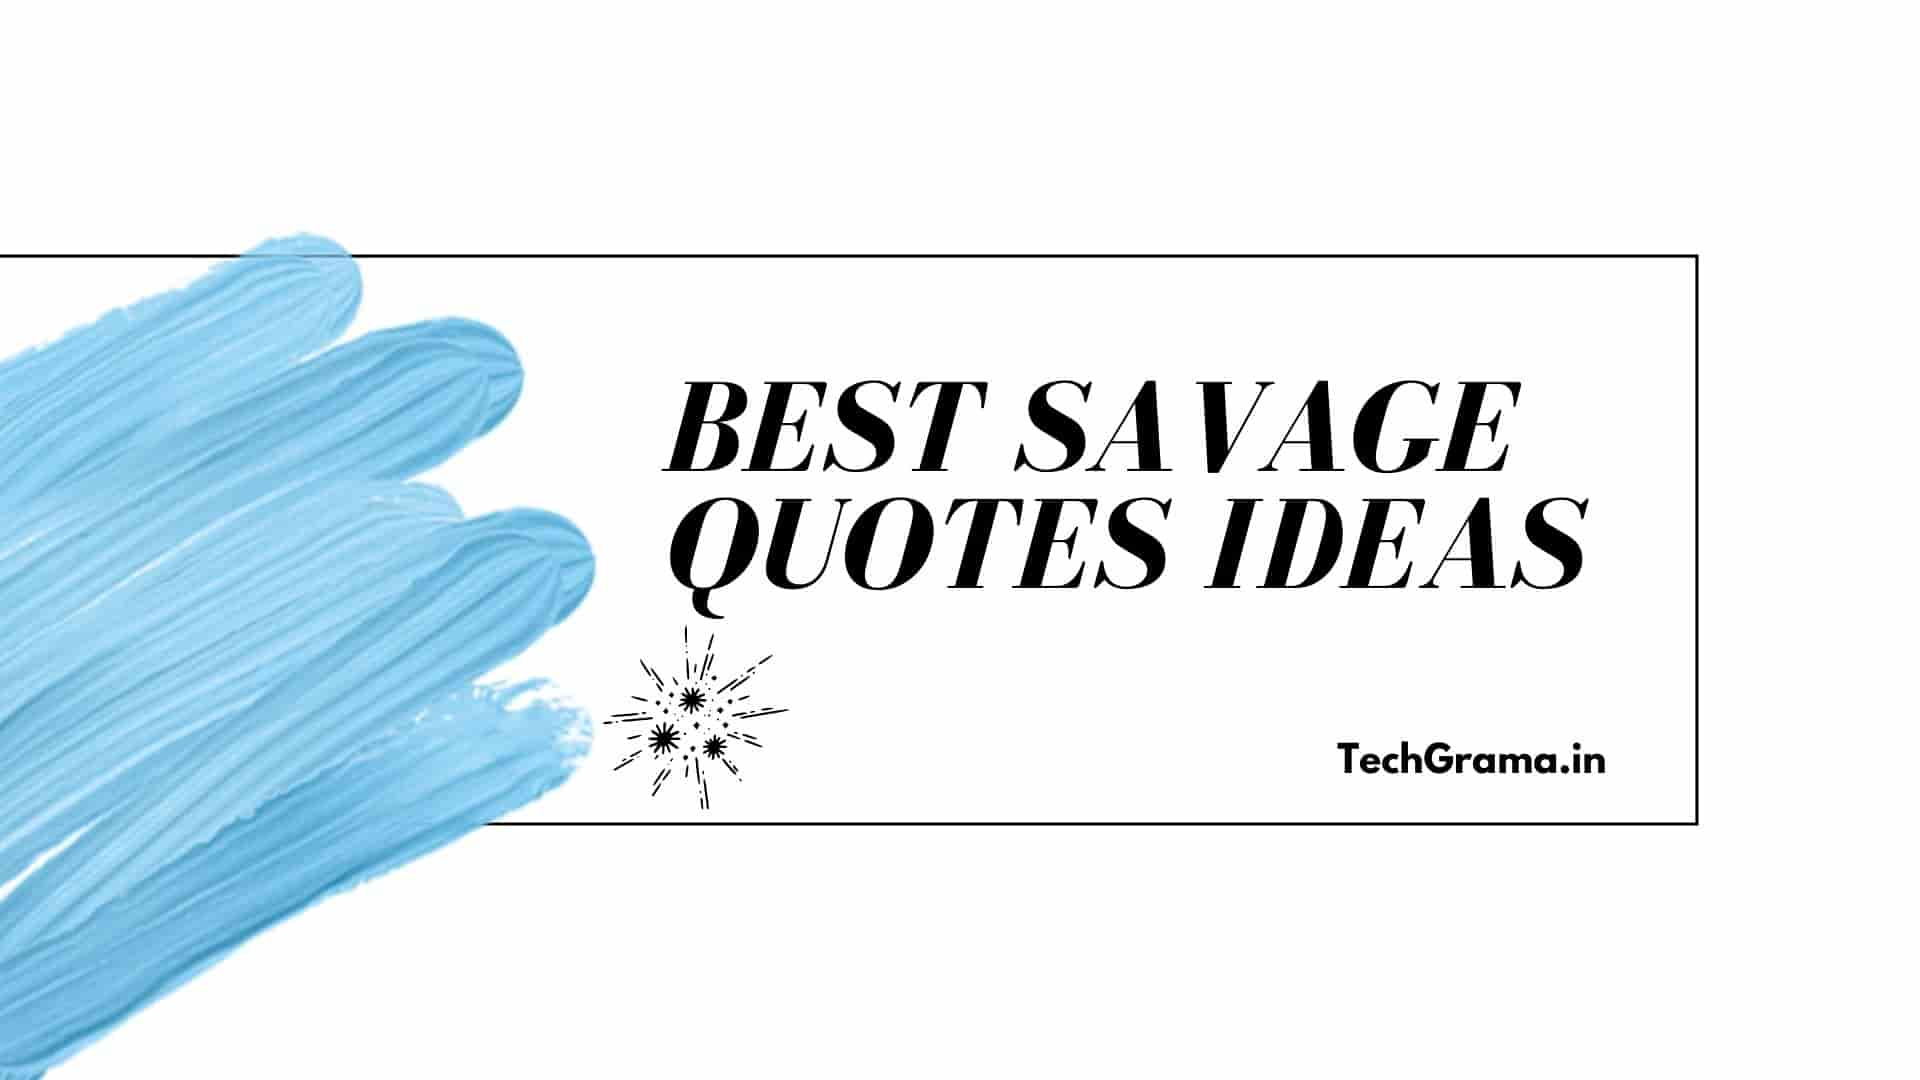 Best Savage Quotes Ideas For Instagram, Savage Girl Quotes, Savage Quotes For Men, Savage Quotes For Ex, Savage Quotes For Guys, Savage Quotes For Haters, Savage Attitude Quotes, Savage Quotes For Instagram, Savage Quotes For Girls & Boys, Savage Quotes About Life, Savage Queen Quotes, Savage Single Quotes, Savage Quotes For Haters And Jealousy, Badass Savage Quotes.